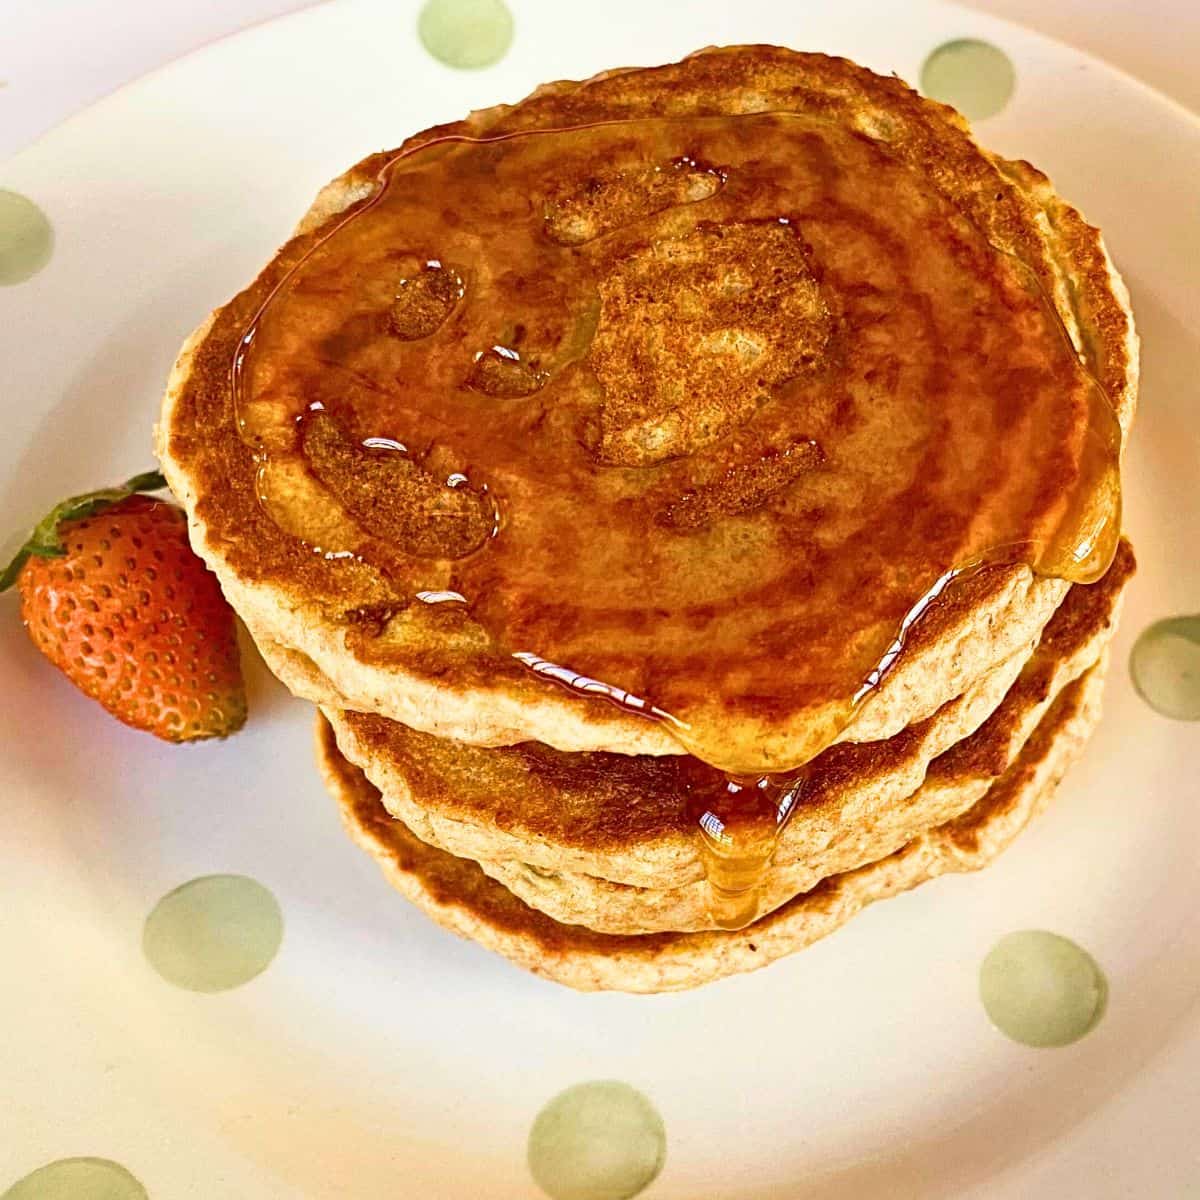 A close up of a stack of pancakes with a strawberry on the side.